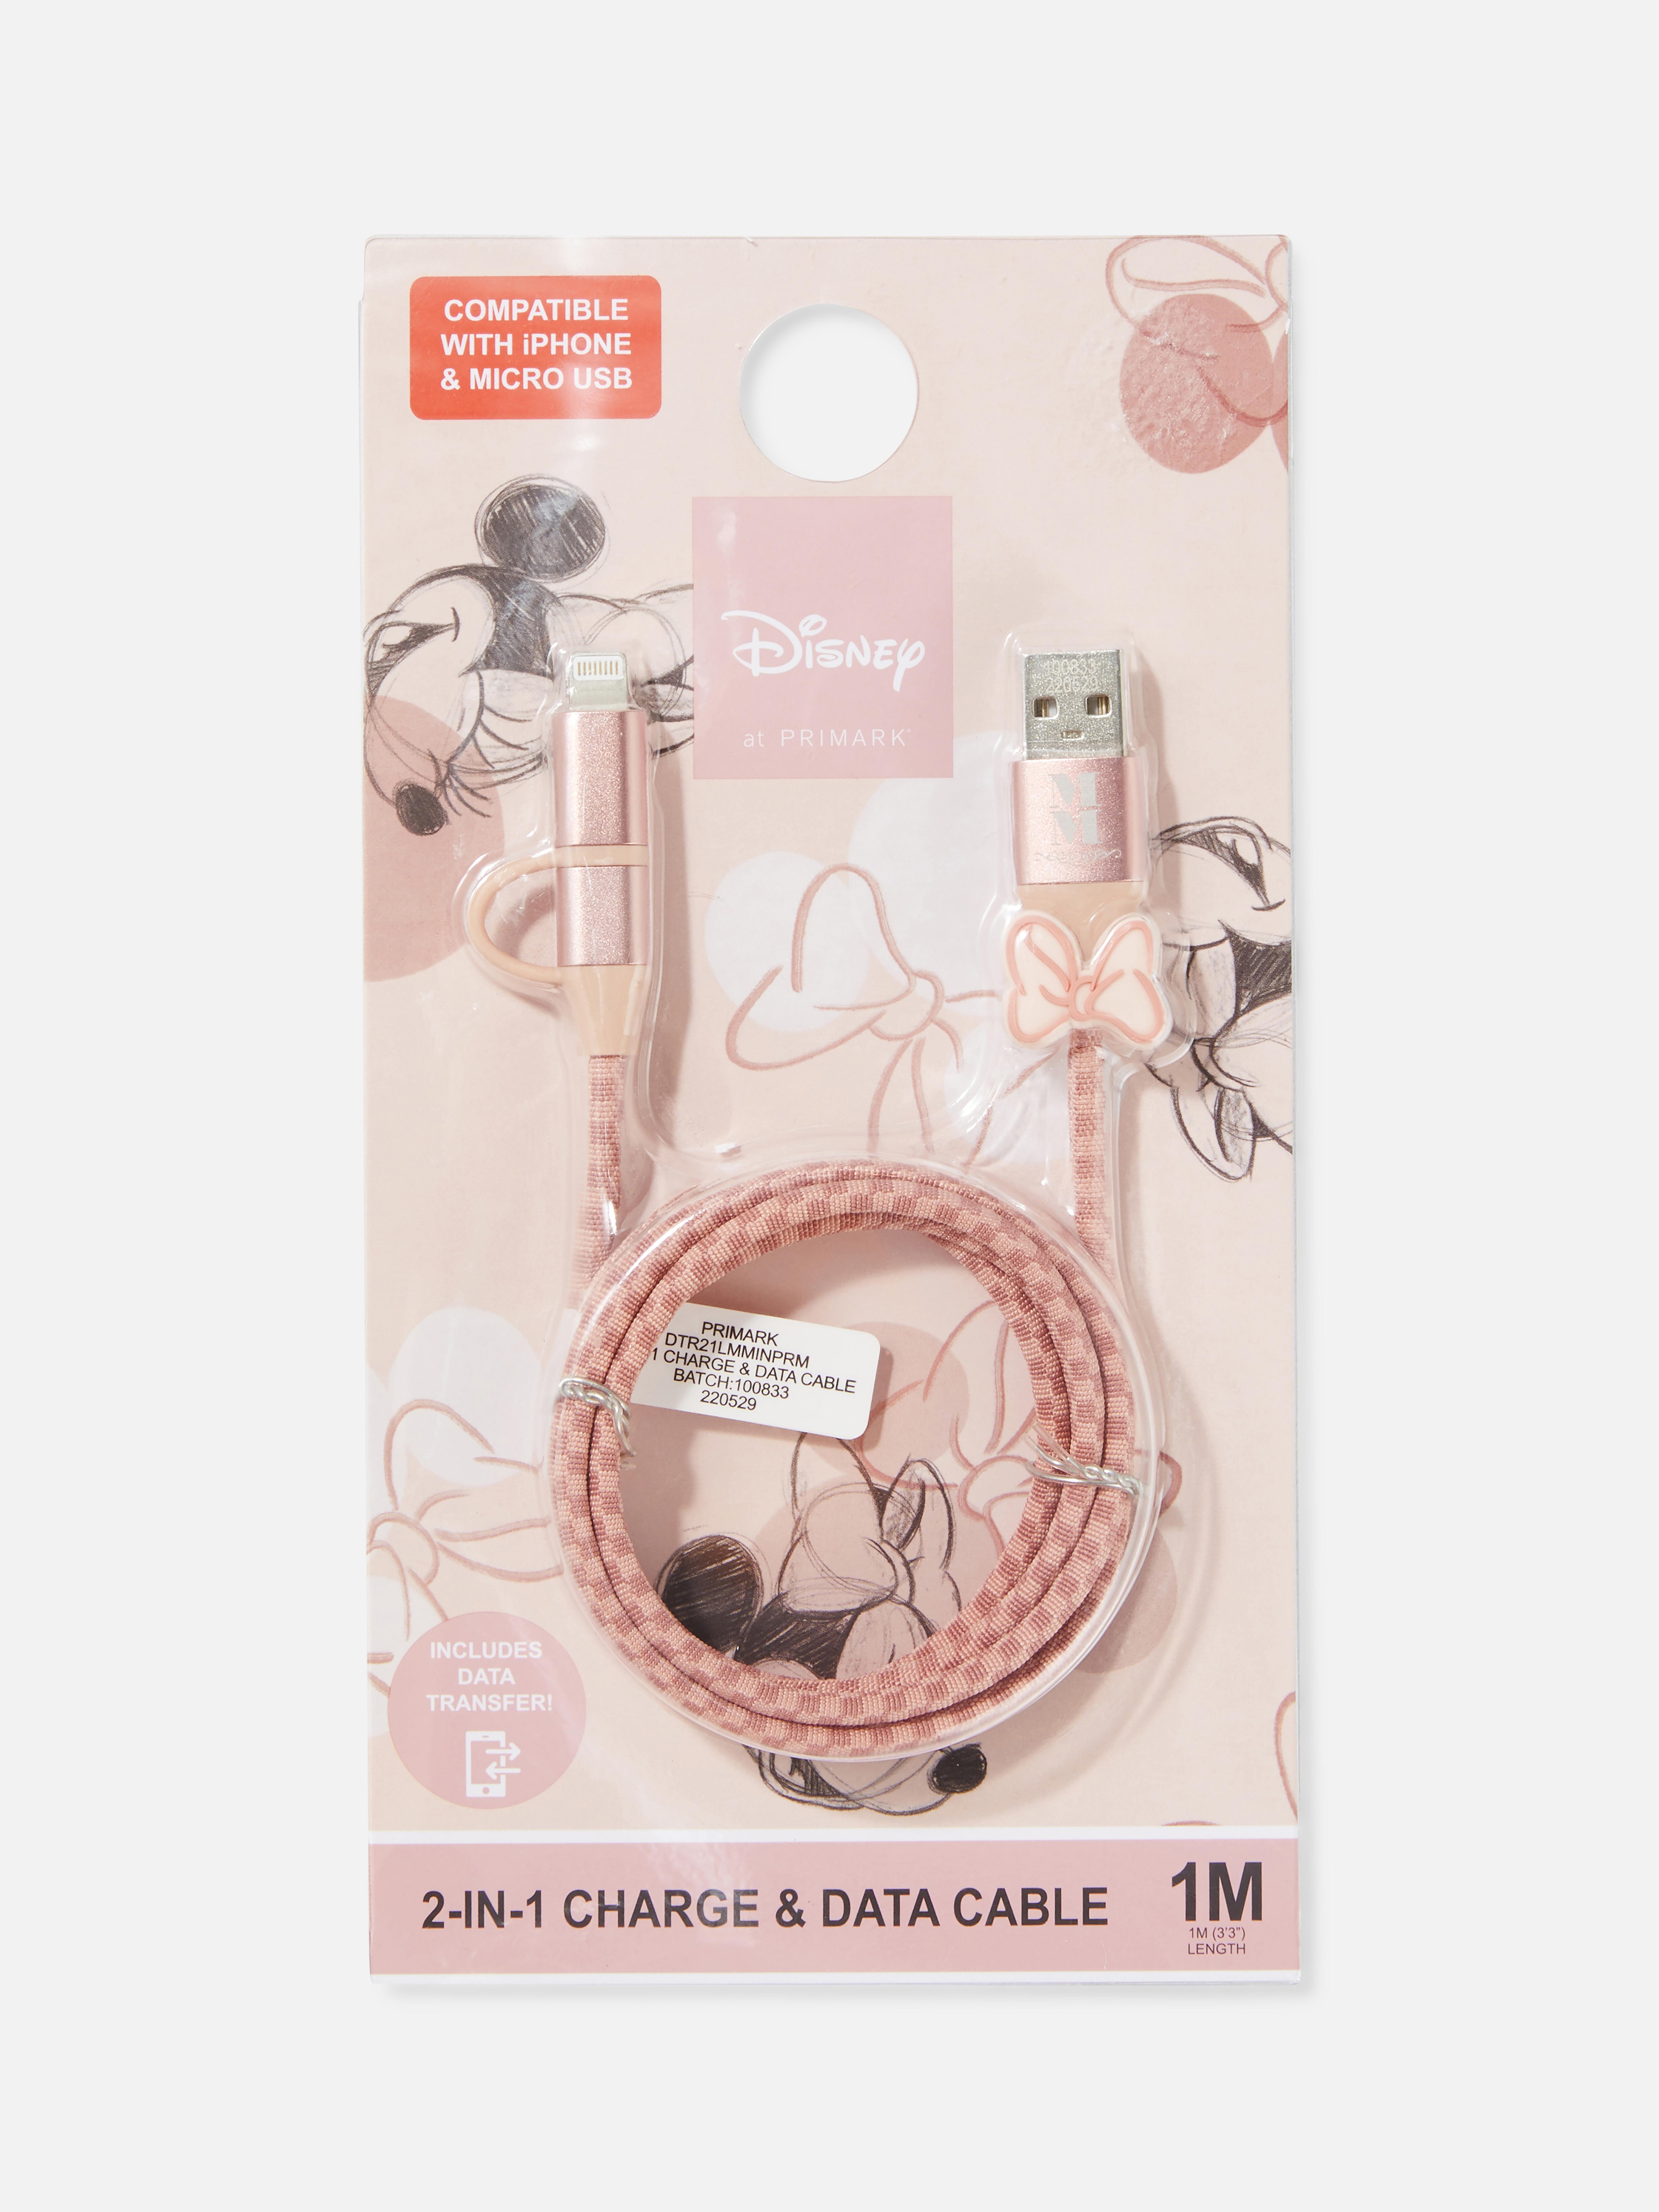 Disney's Minnie Mouse Charging Cable